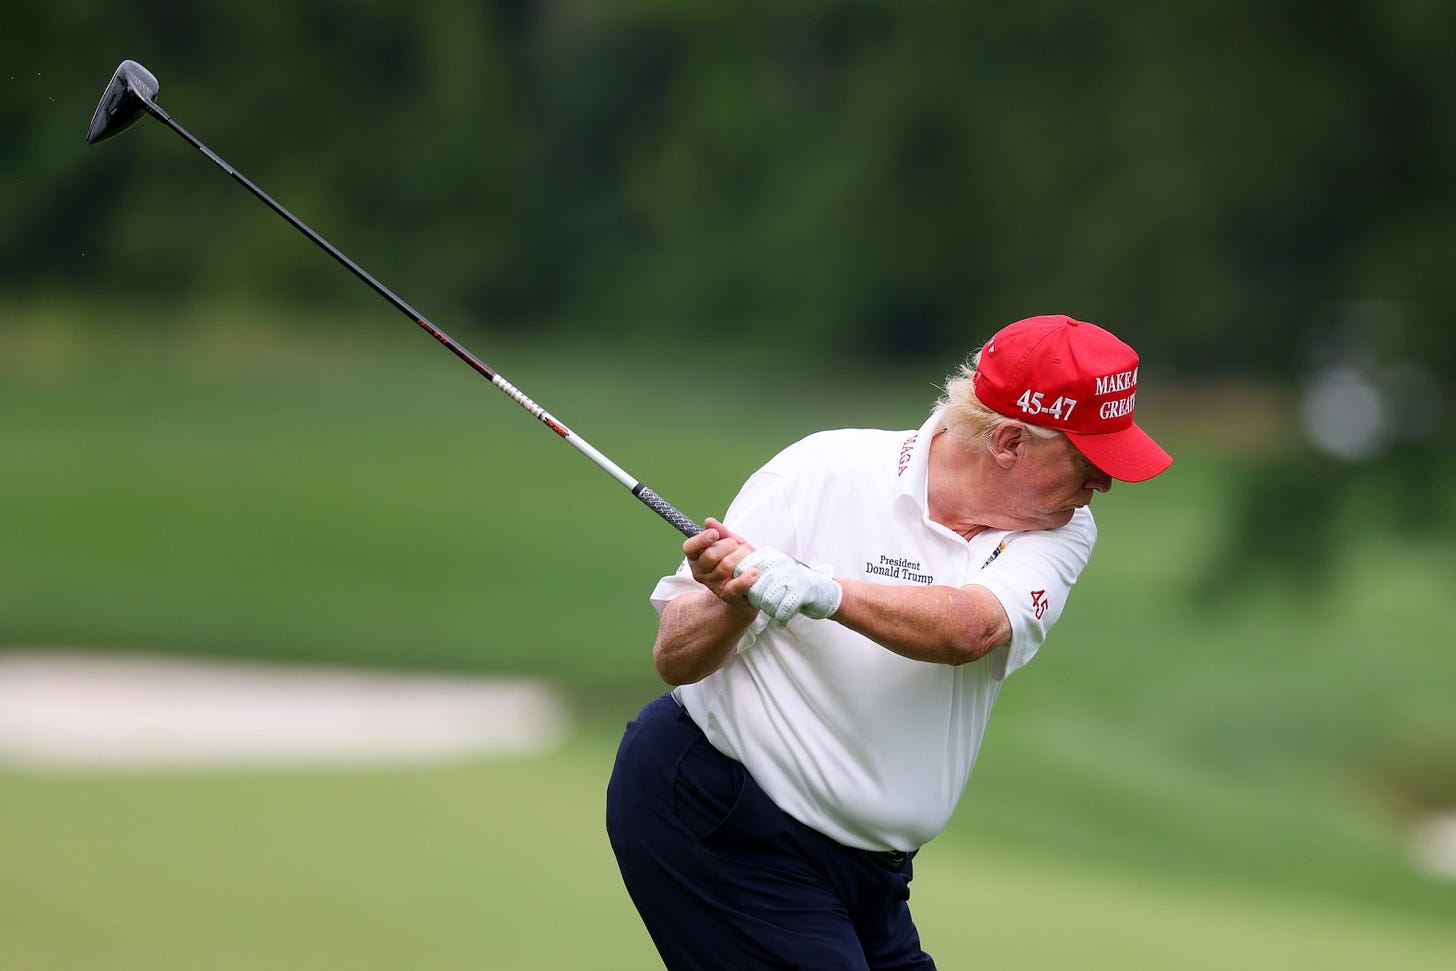 Trump, Notorious Golf Cheat, Claims He Beat Phil Mickelson's Score